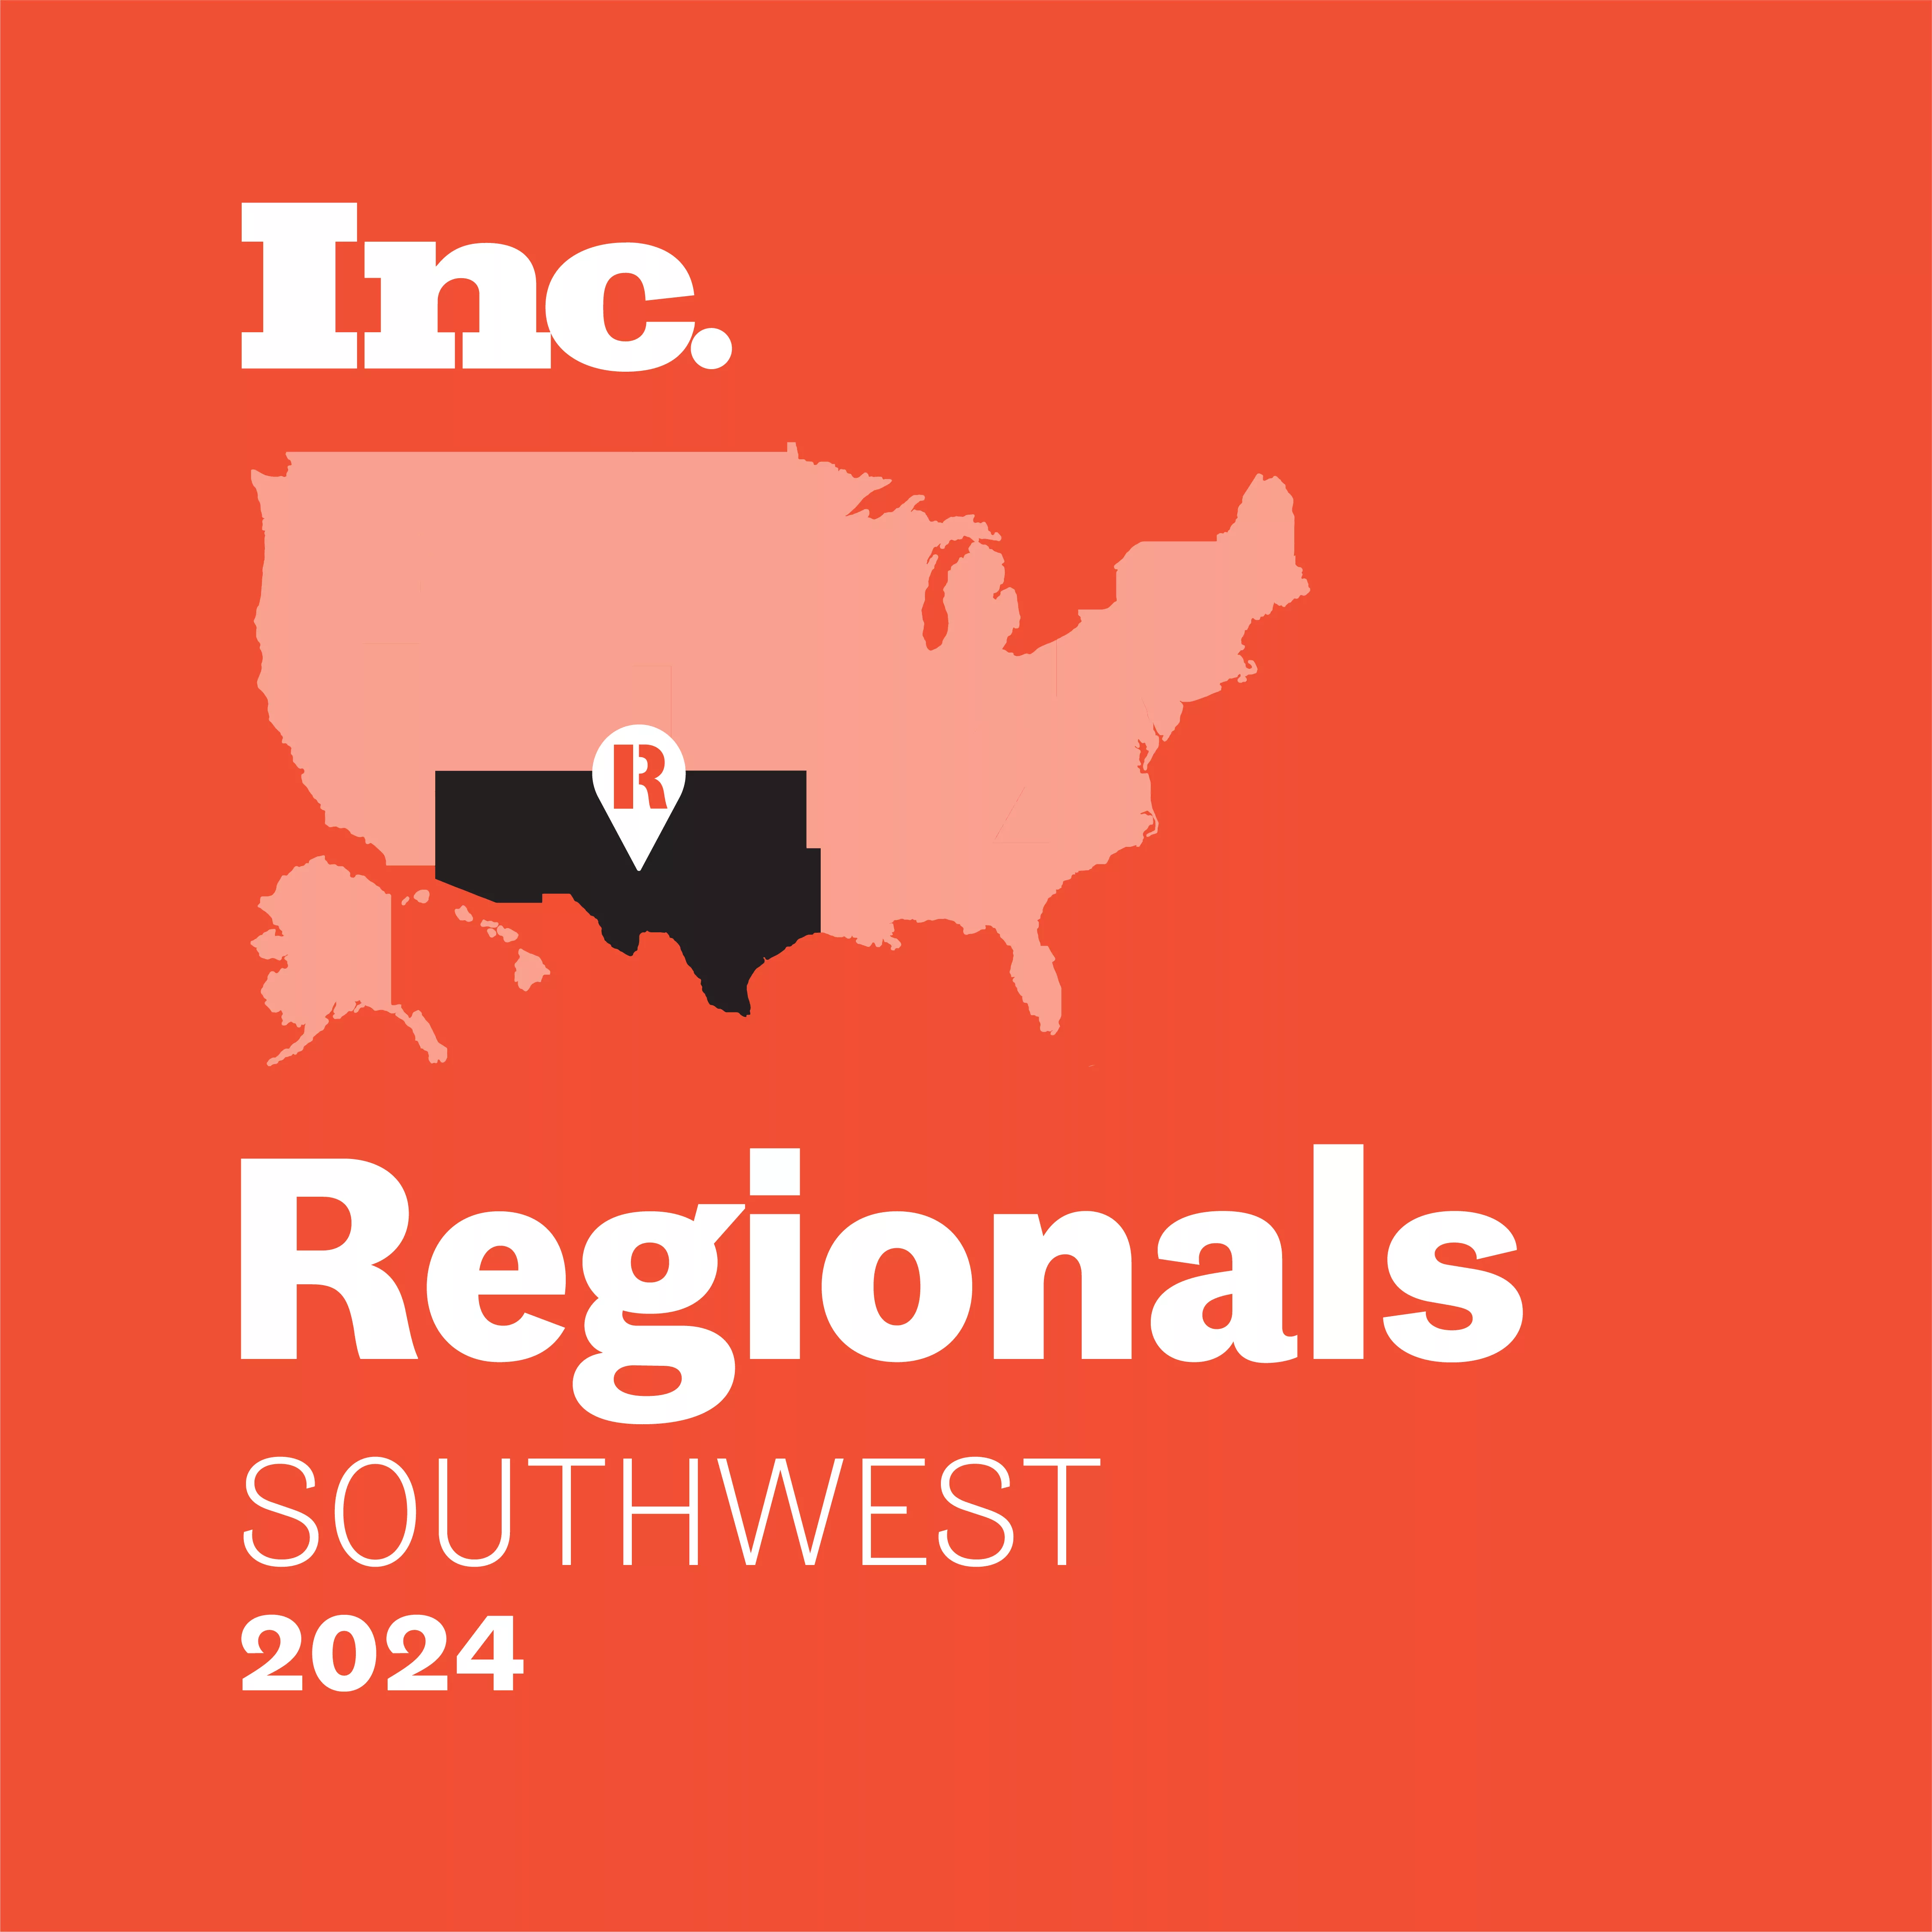 Regionals 2024: Southwest Bob Lilly Promotions